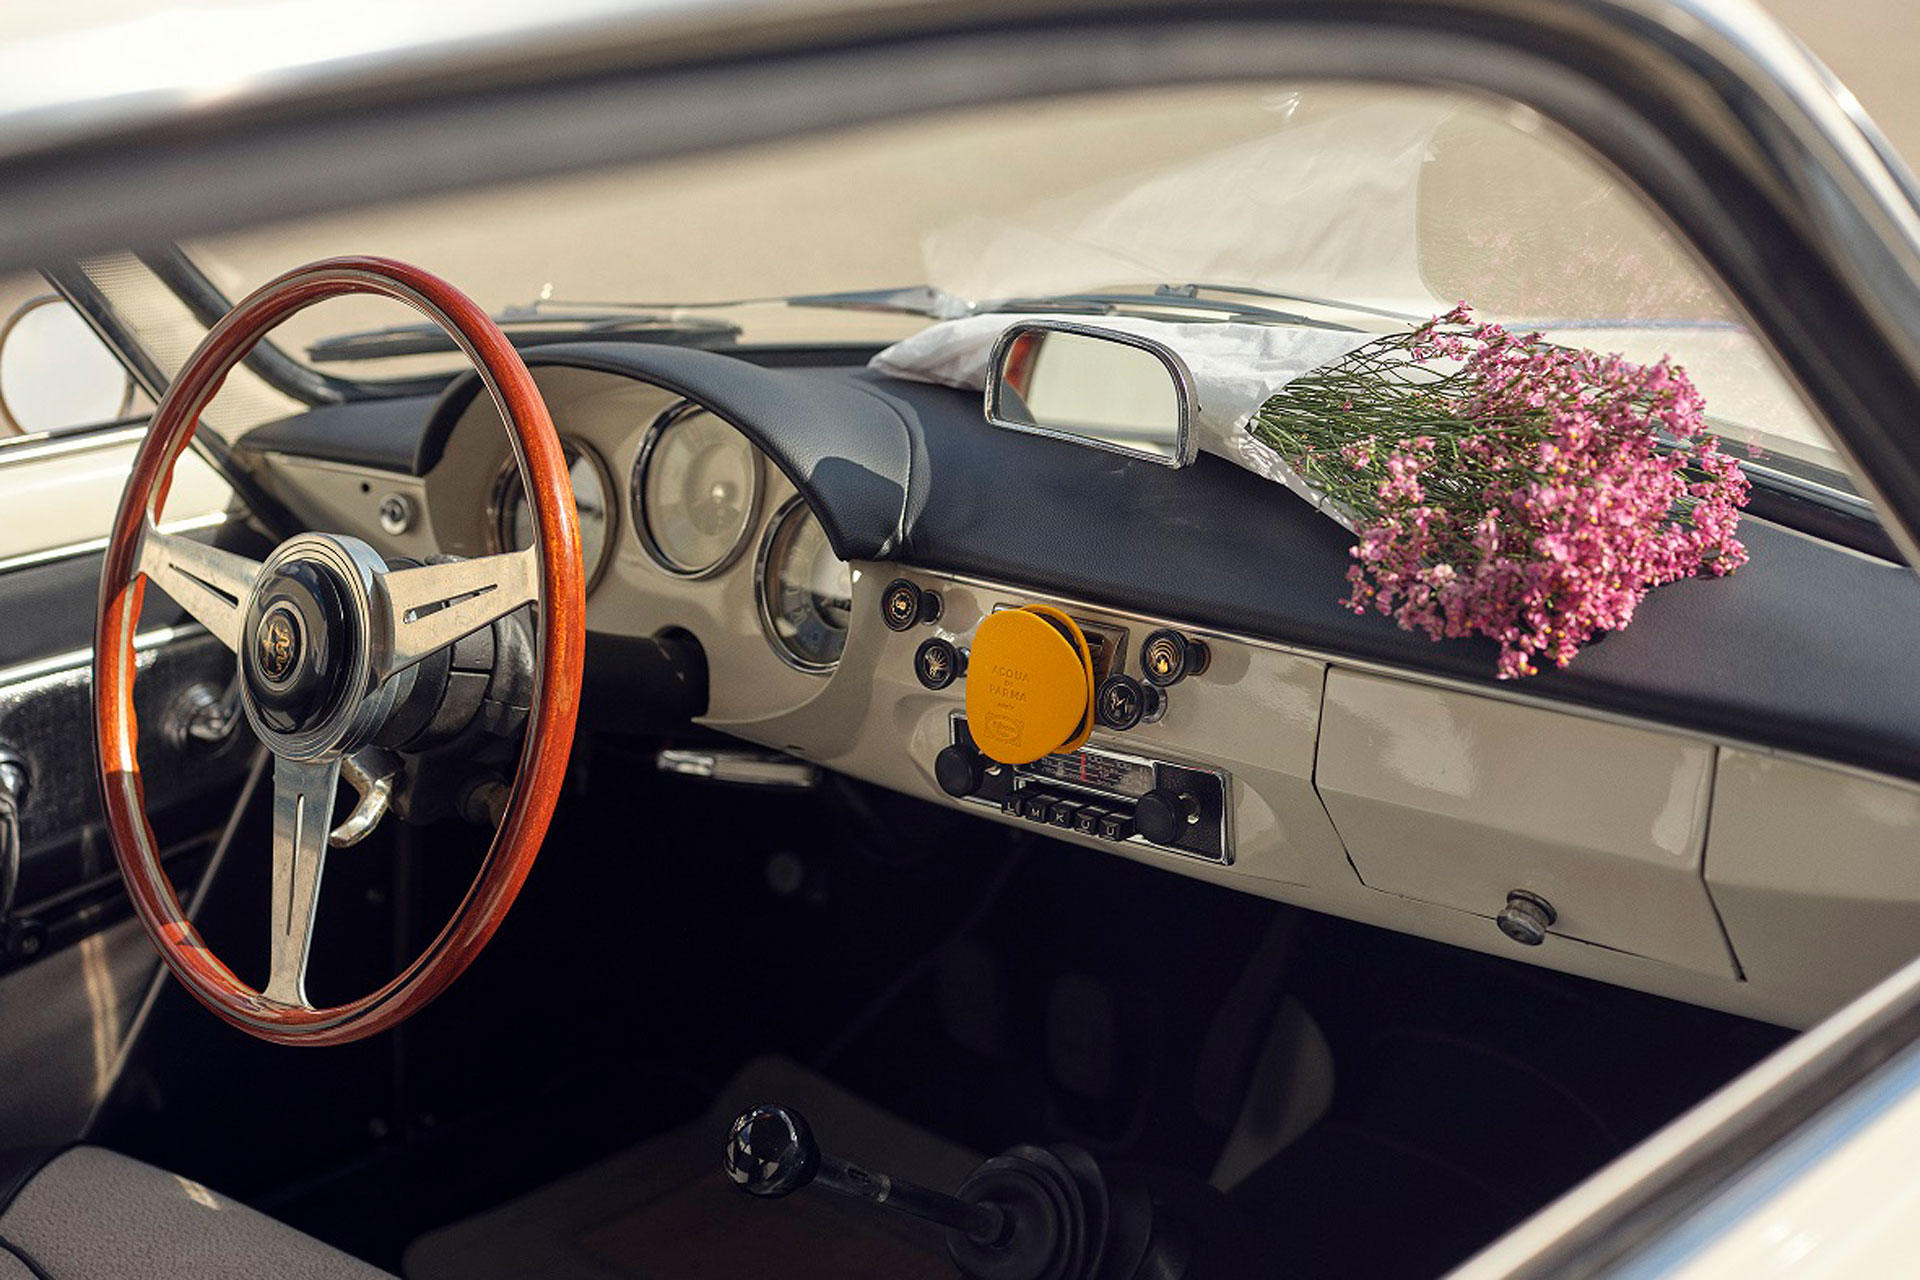 7 Of The Most Delicious-Scented Car Diffusers